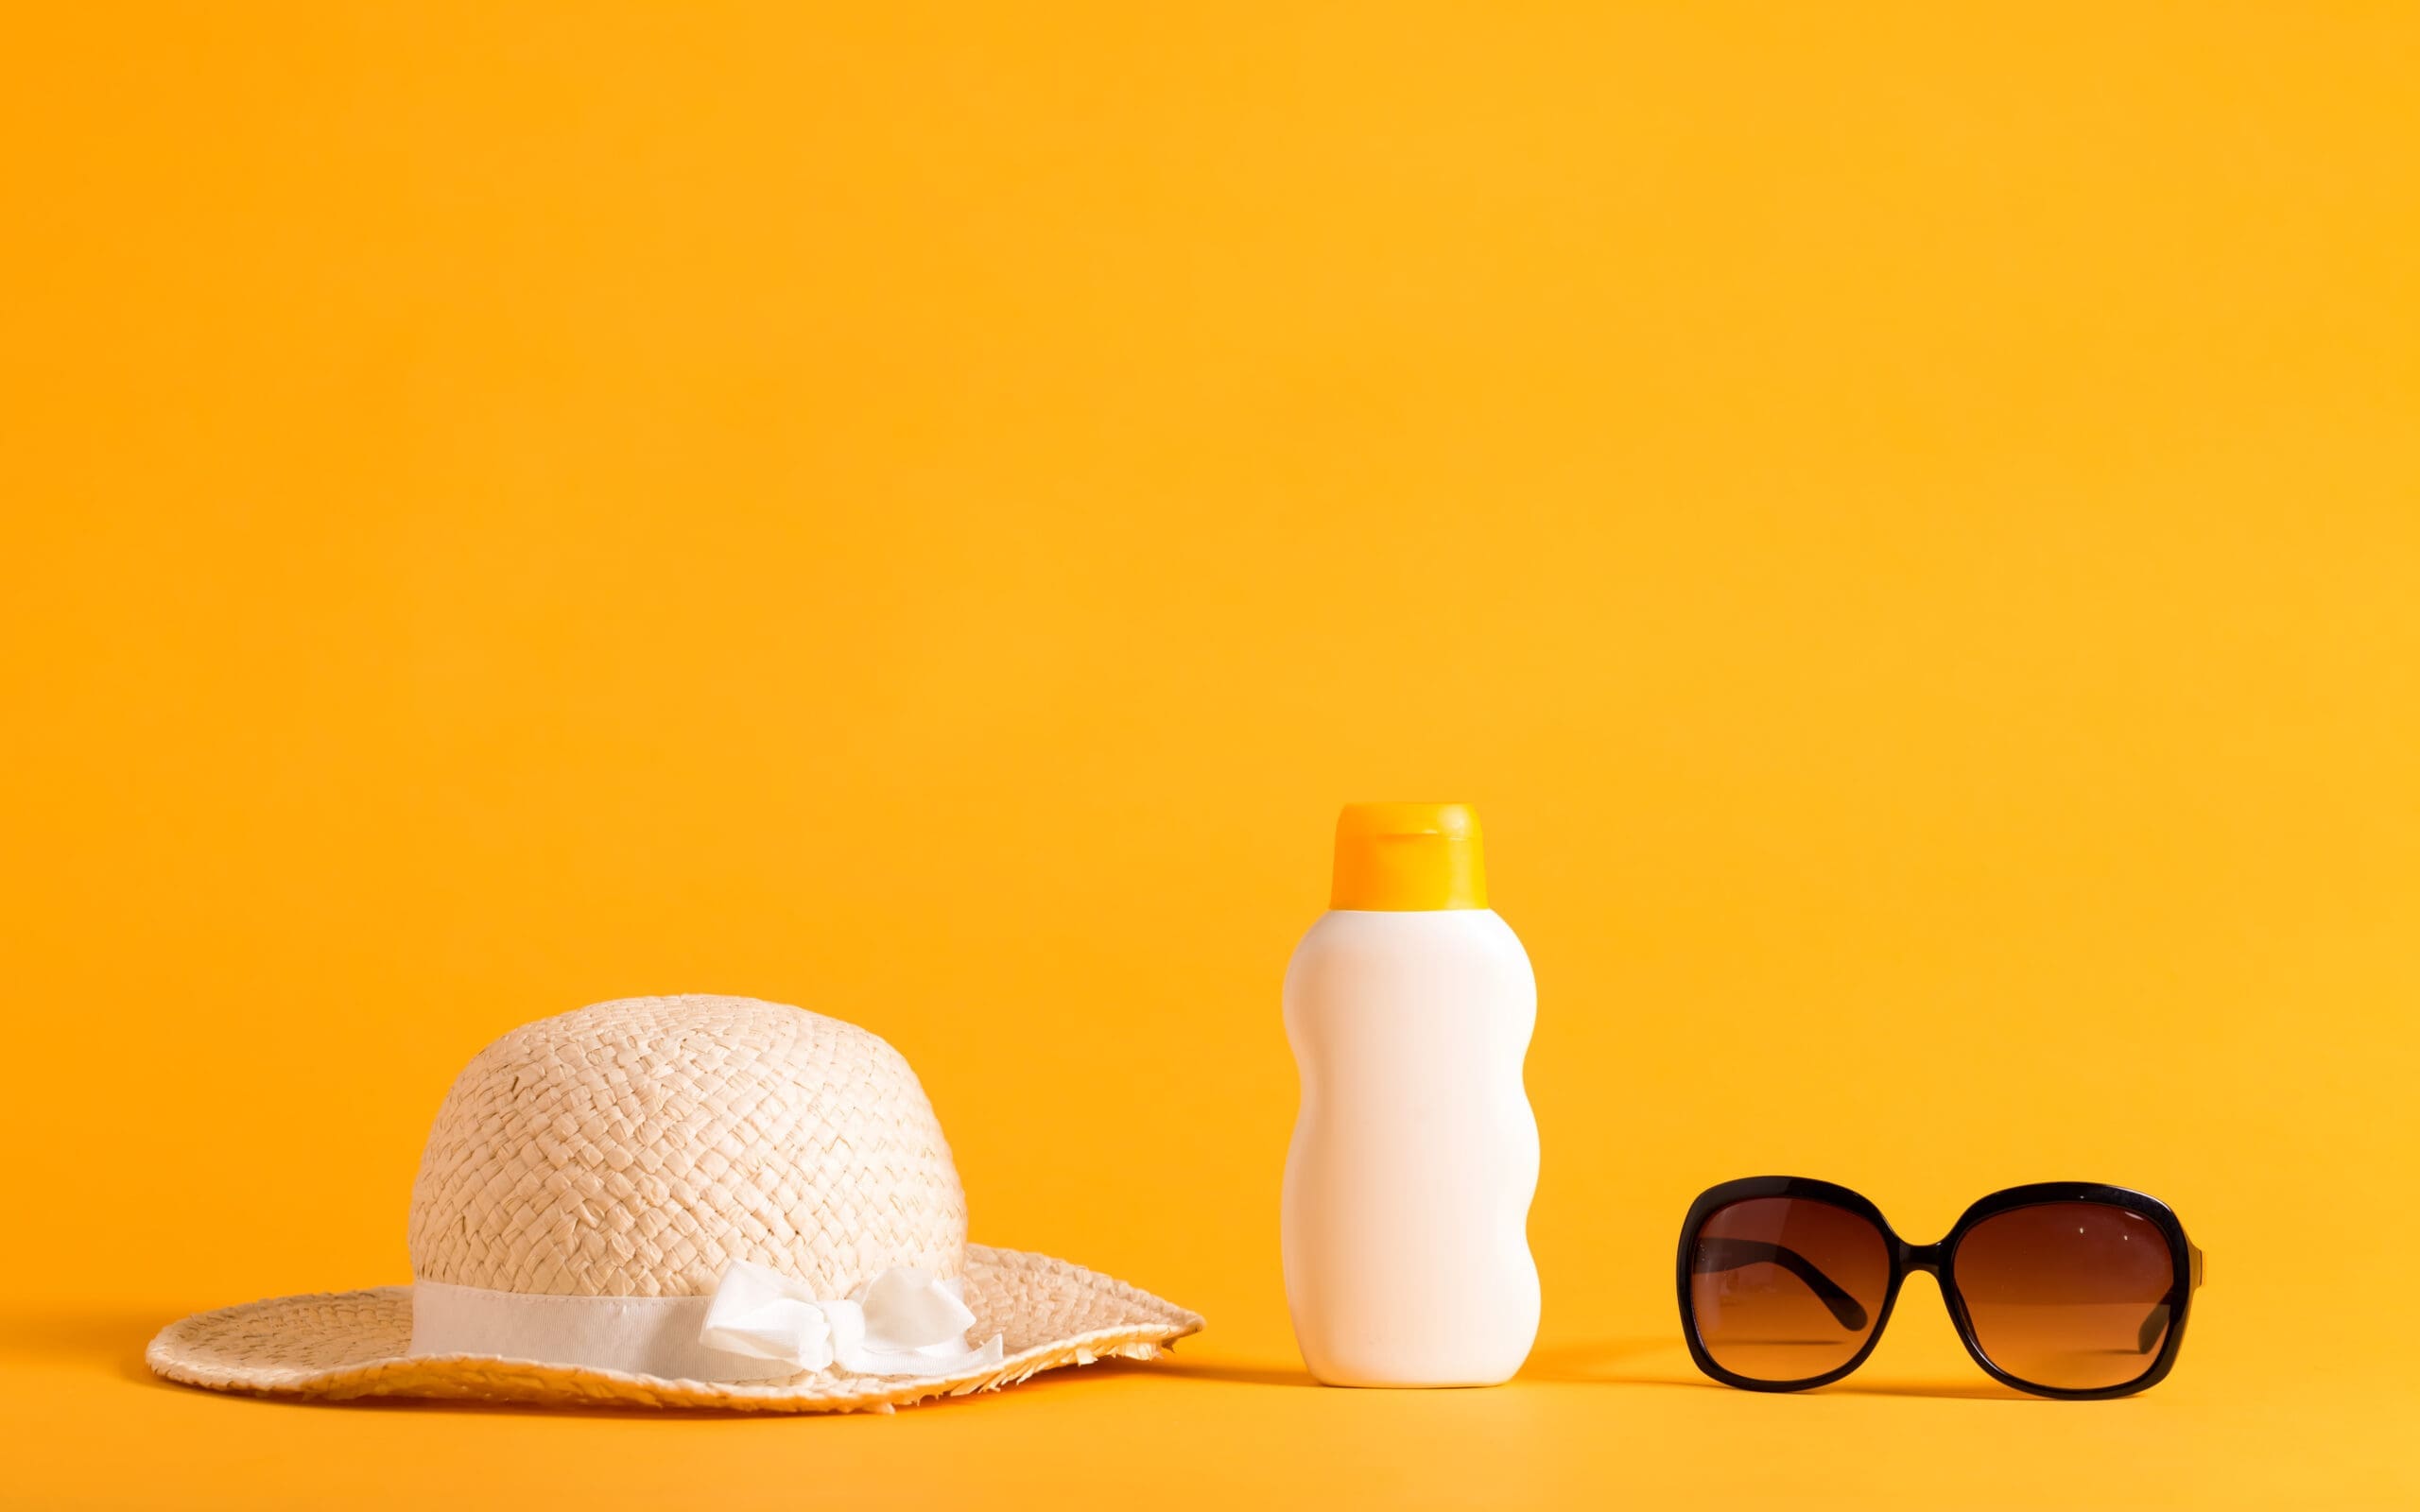 What are the symptoms and common causes of sunburn?